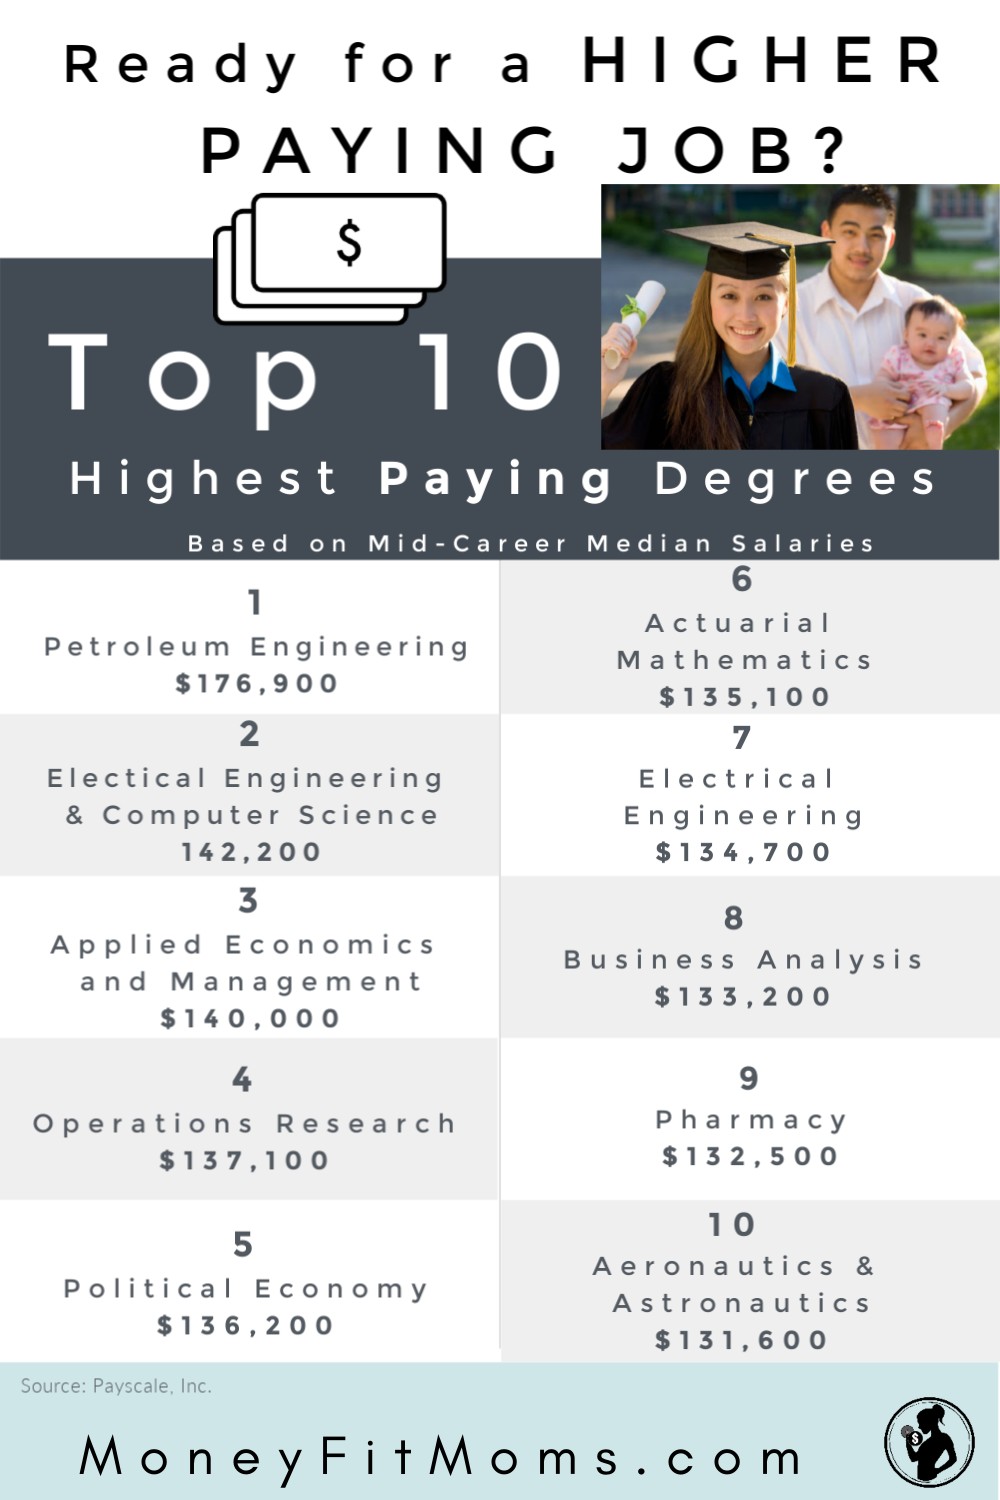 Highest Paying Undergrad Degrees - What Job makes the most money? College Degrees Most Money - Highest Paying Jobs